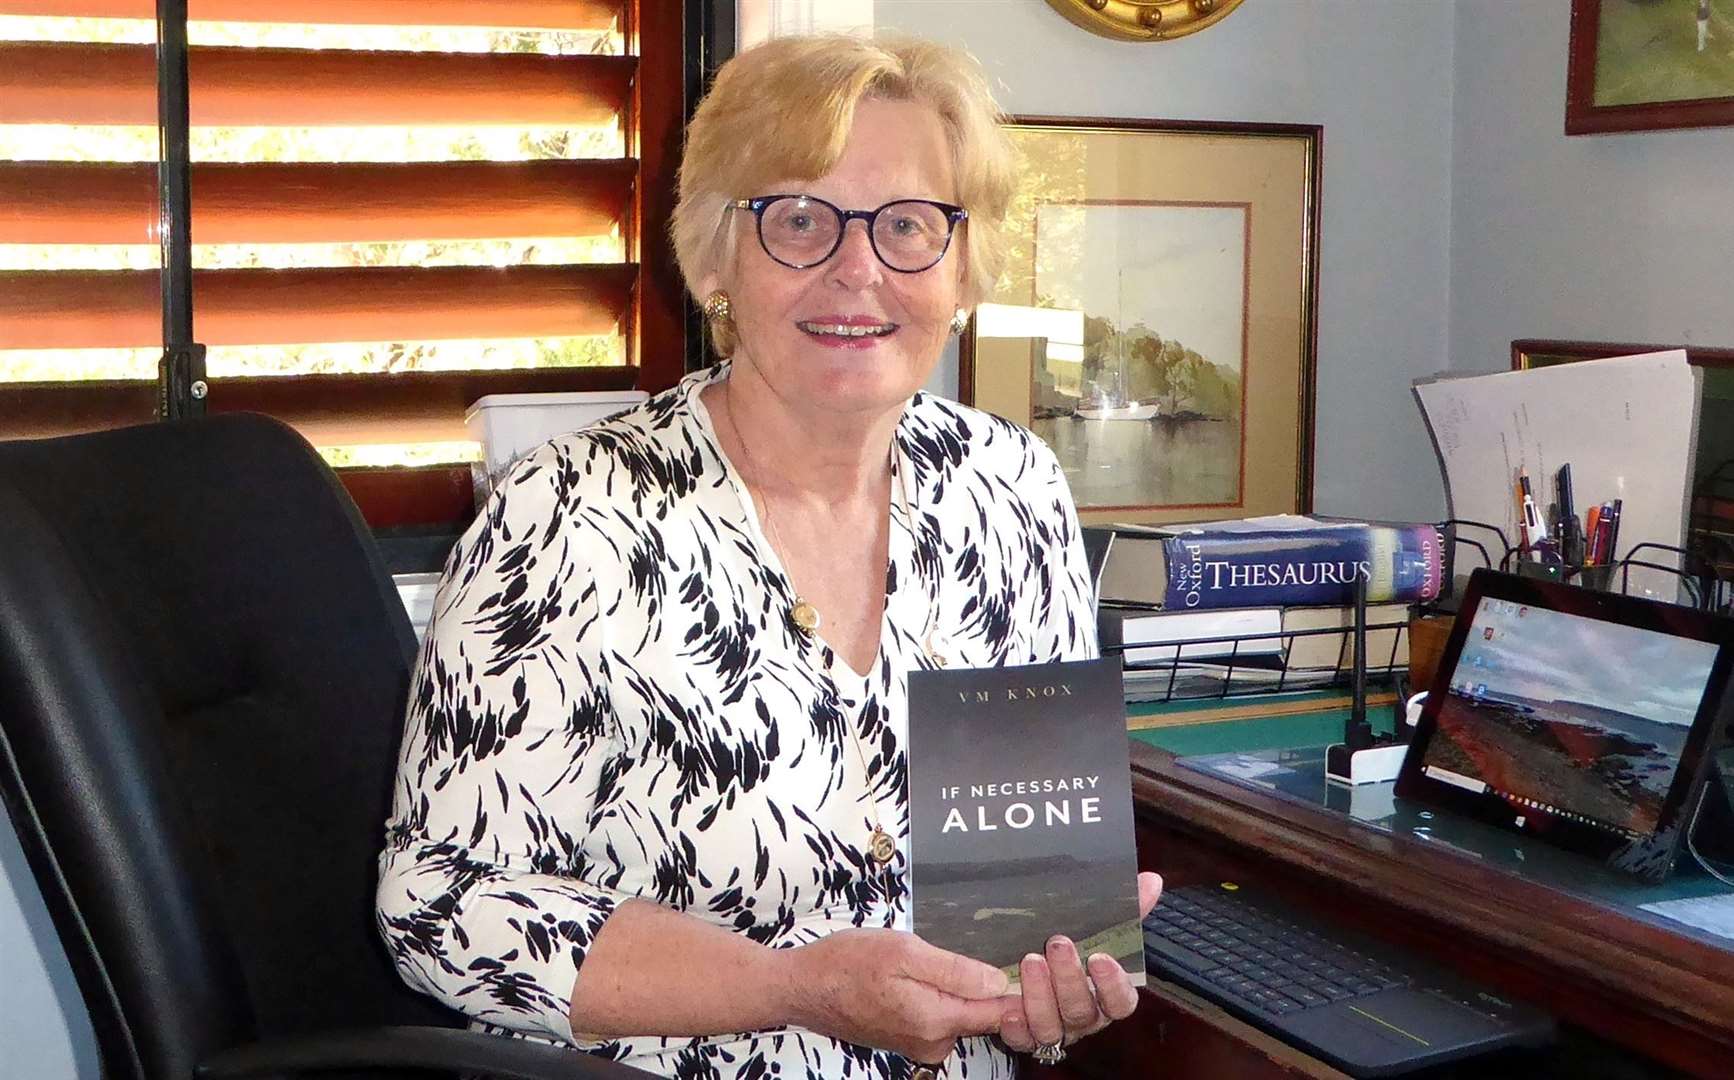 Australian author Victoria Knox with her wartime thriller set in Caithness called If Necessary, Alone.